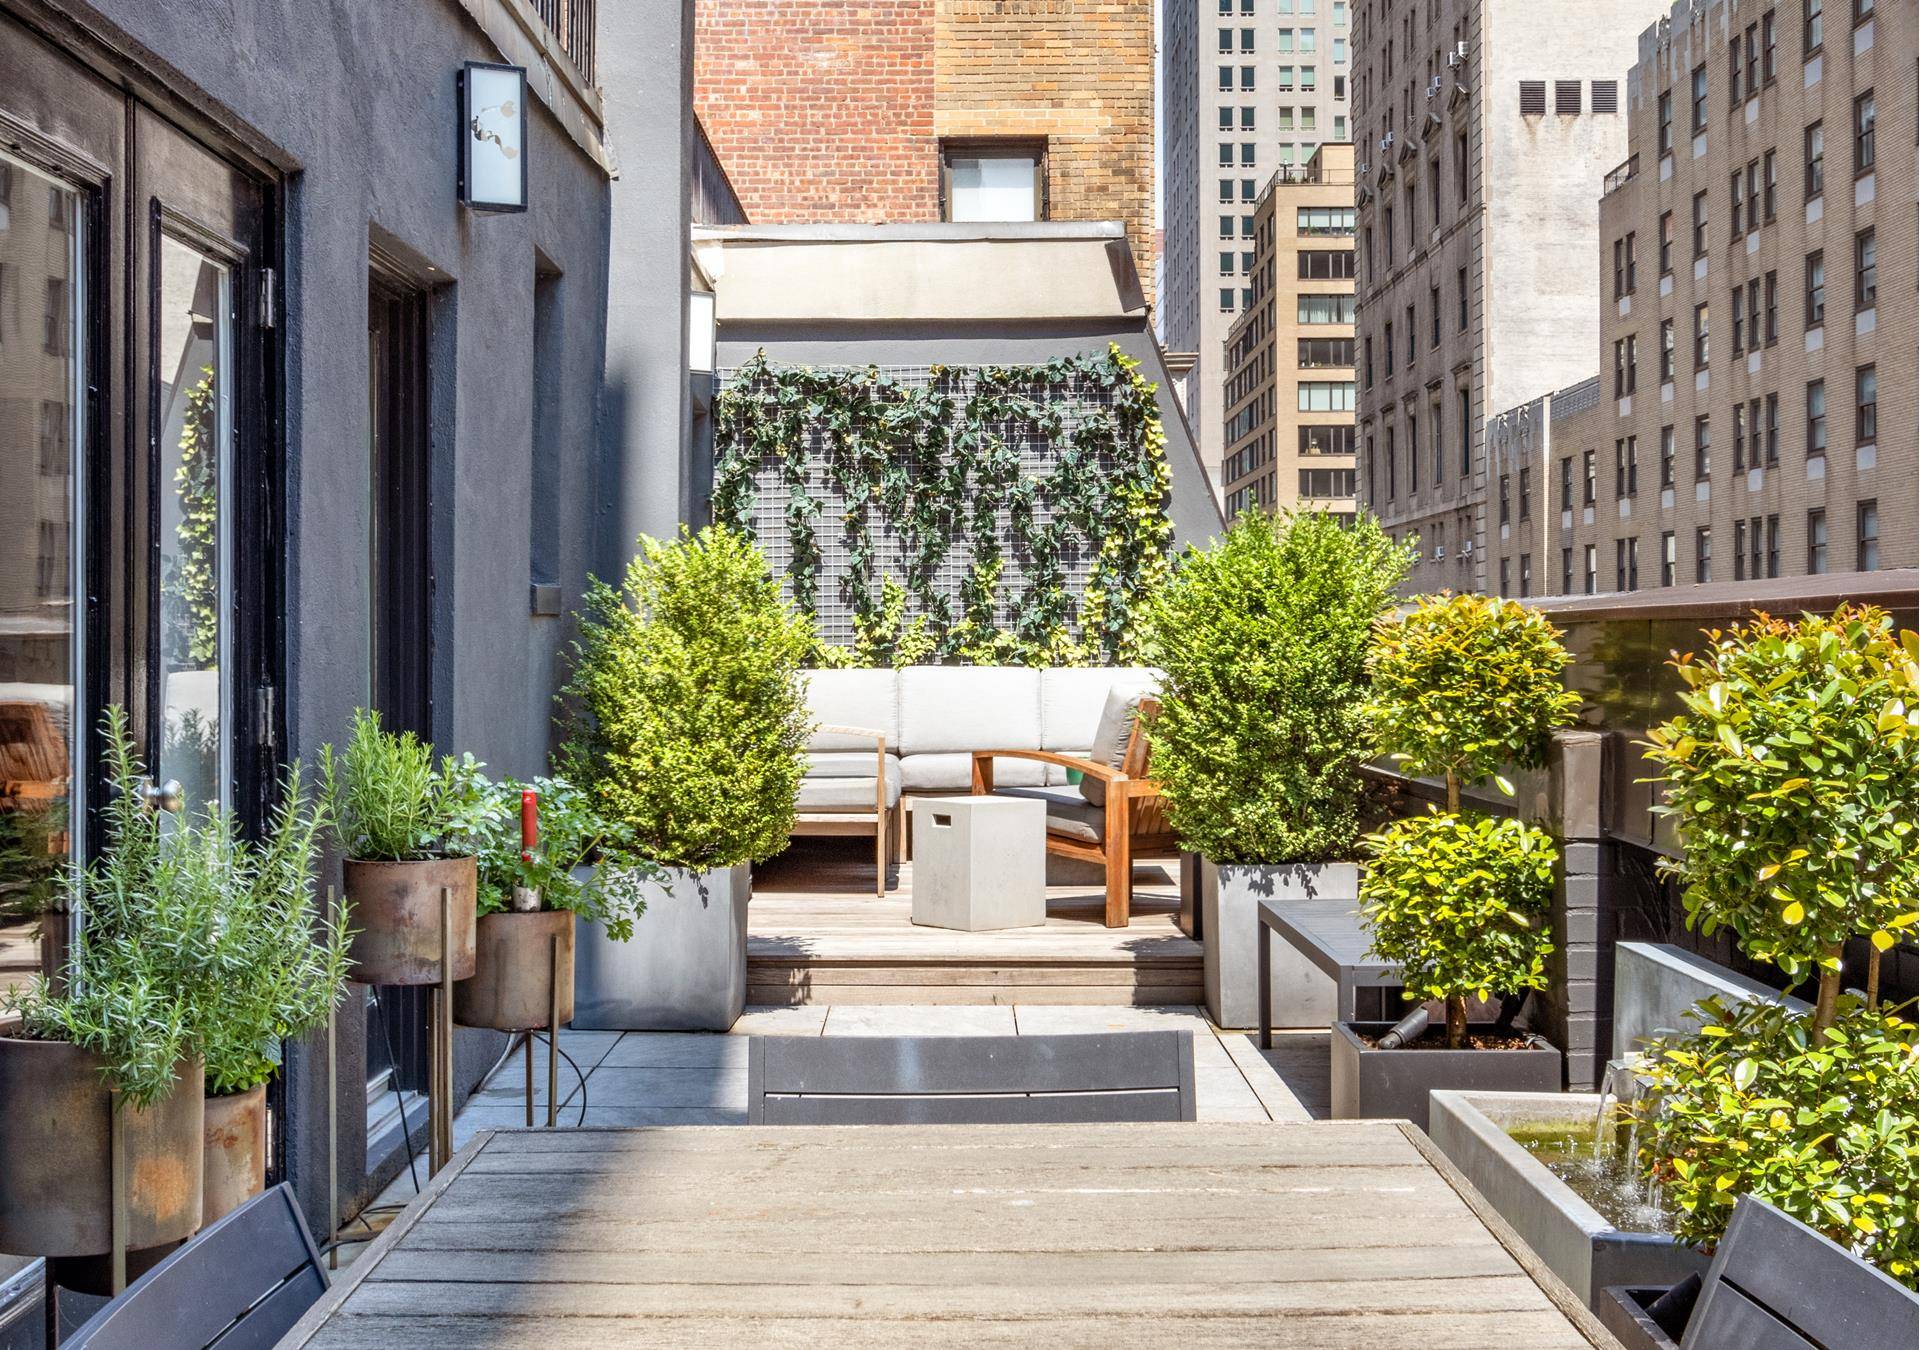 Stylish pre war penthouse with extraordinary outdoor space.